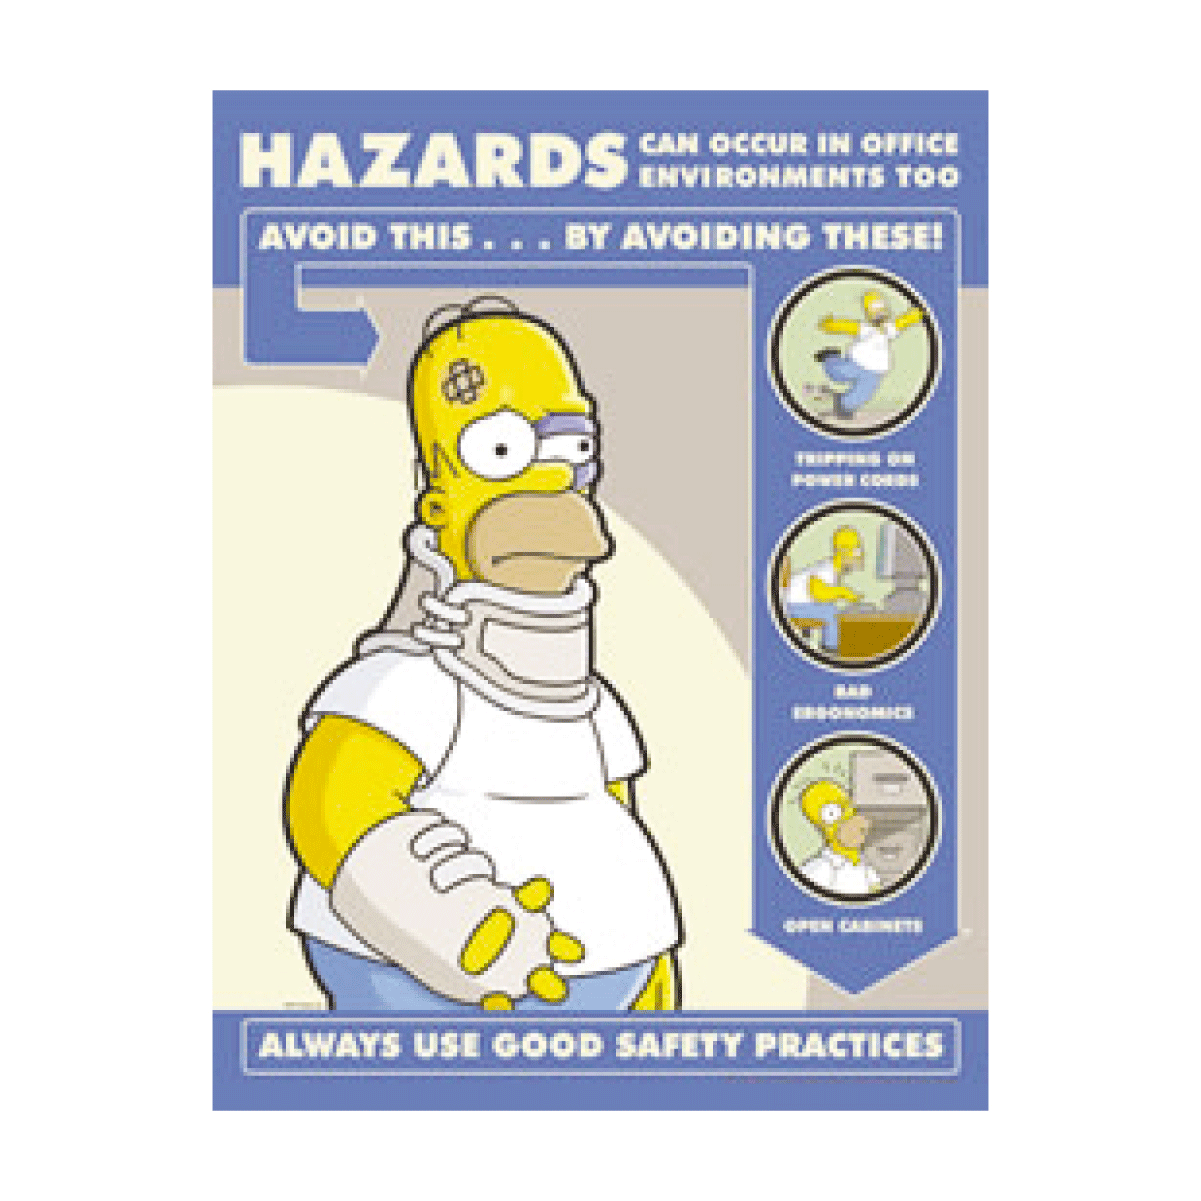 Simpsons Hazards In Office Environment Poster   Ebay